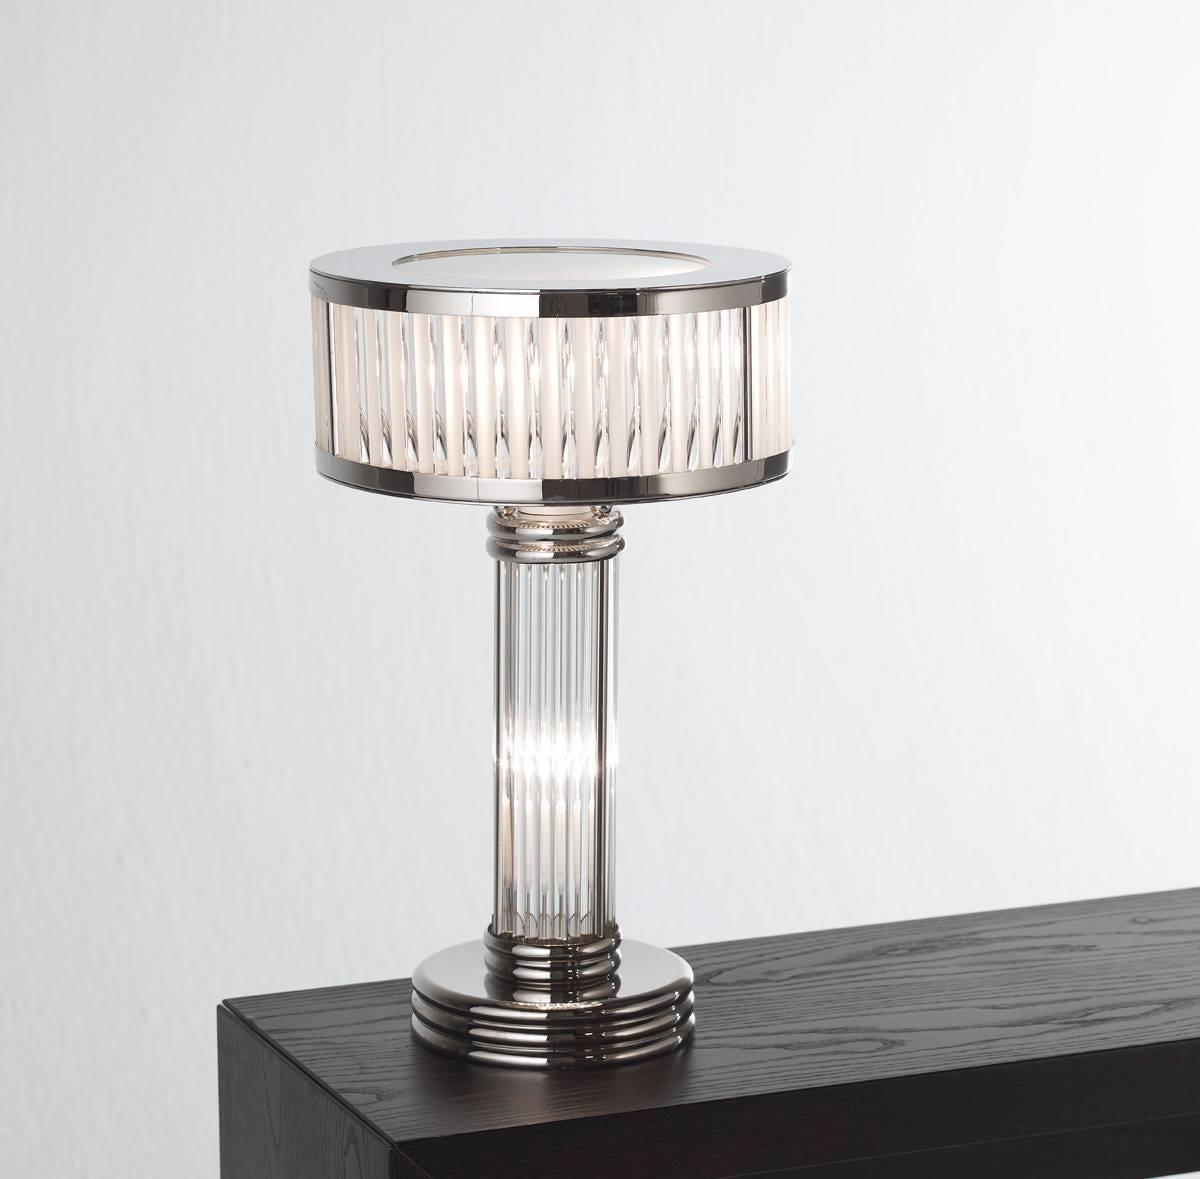 Art Deco table lamp with nickel finish and glass rods.